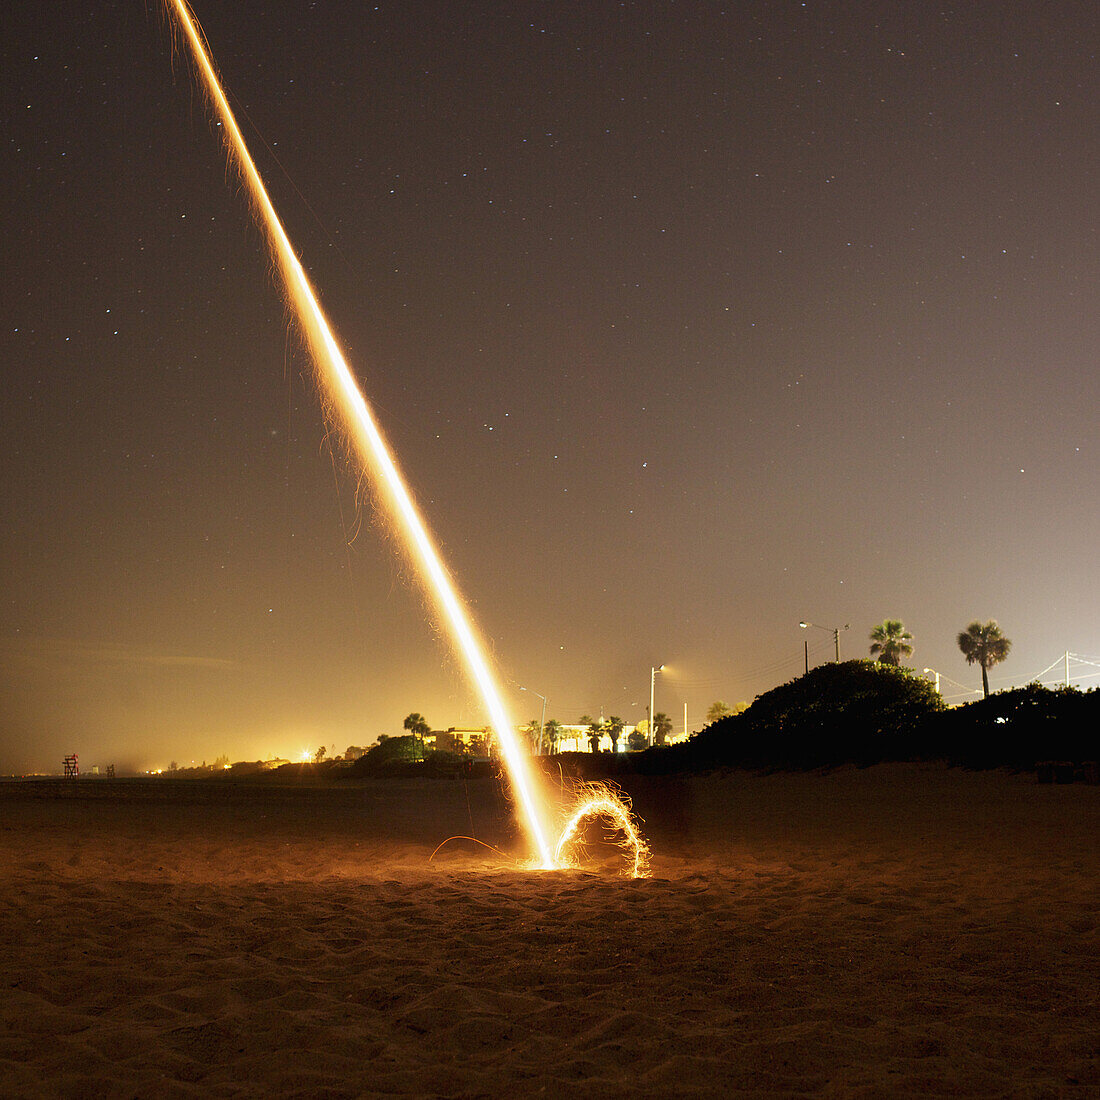 A firework exploding on a beach at night